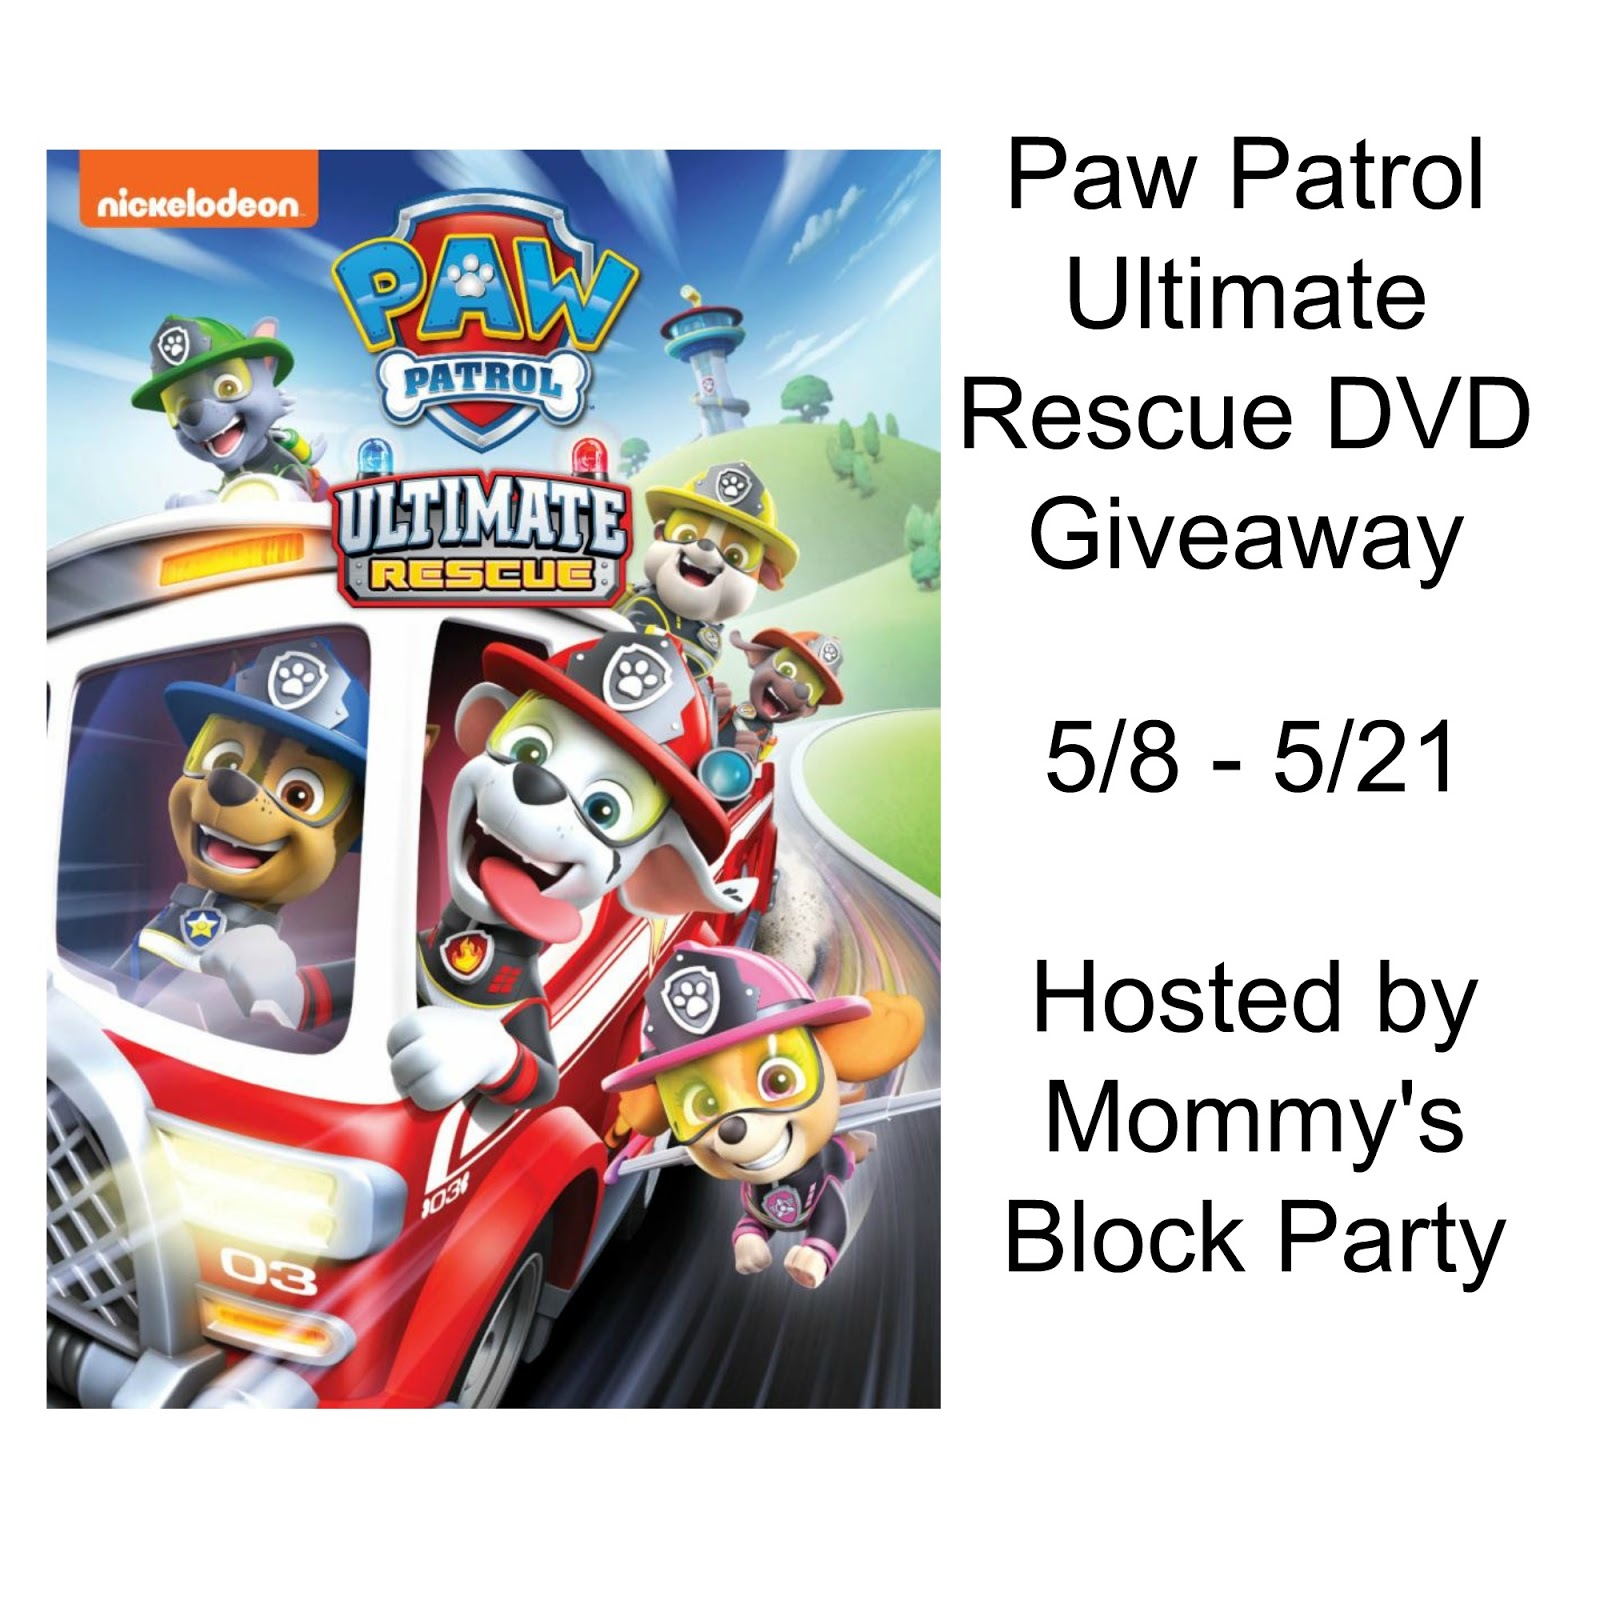 PAW PATROL: ULTIMATE RESCUE #Giveaway - Mommy's Block